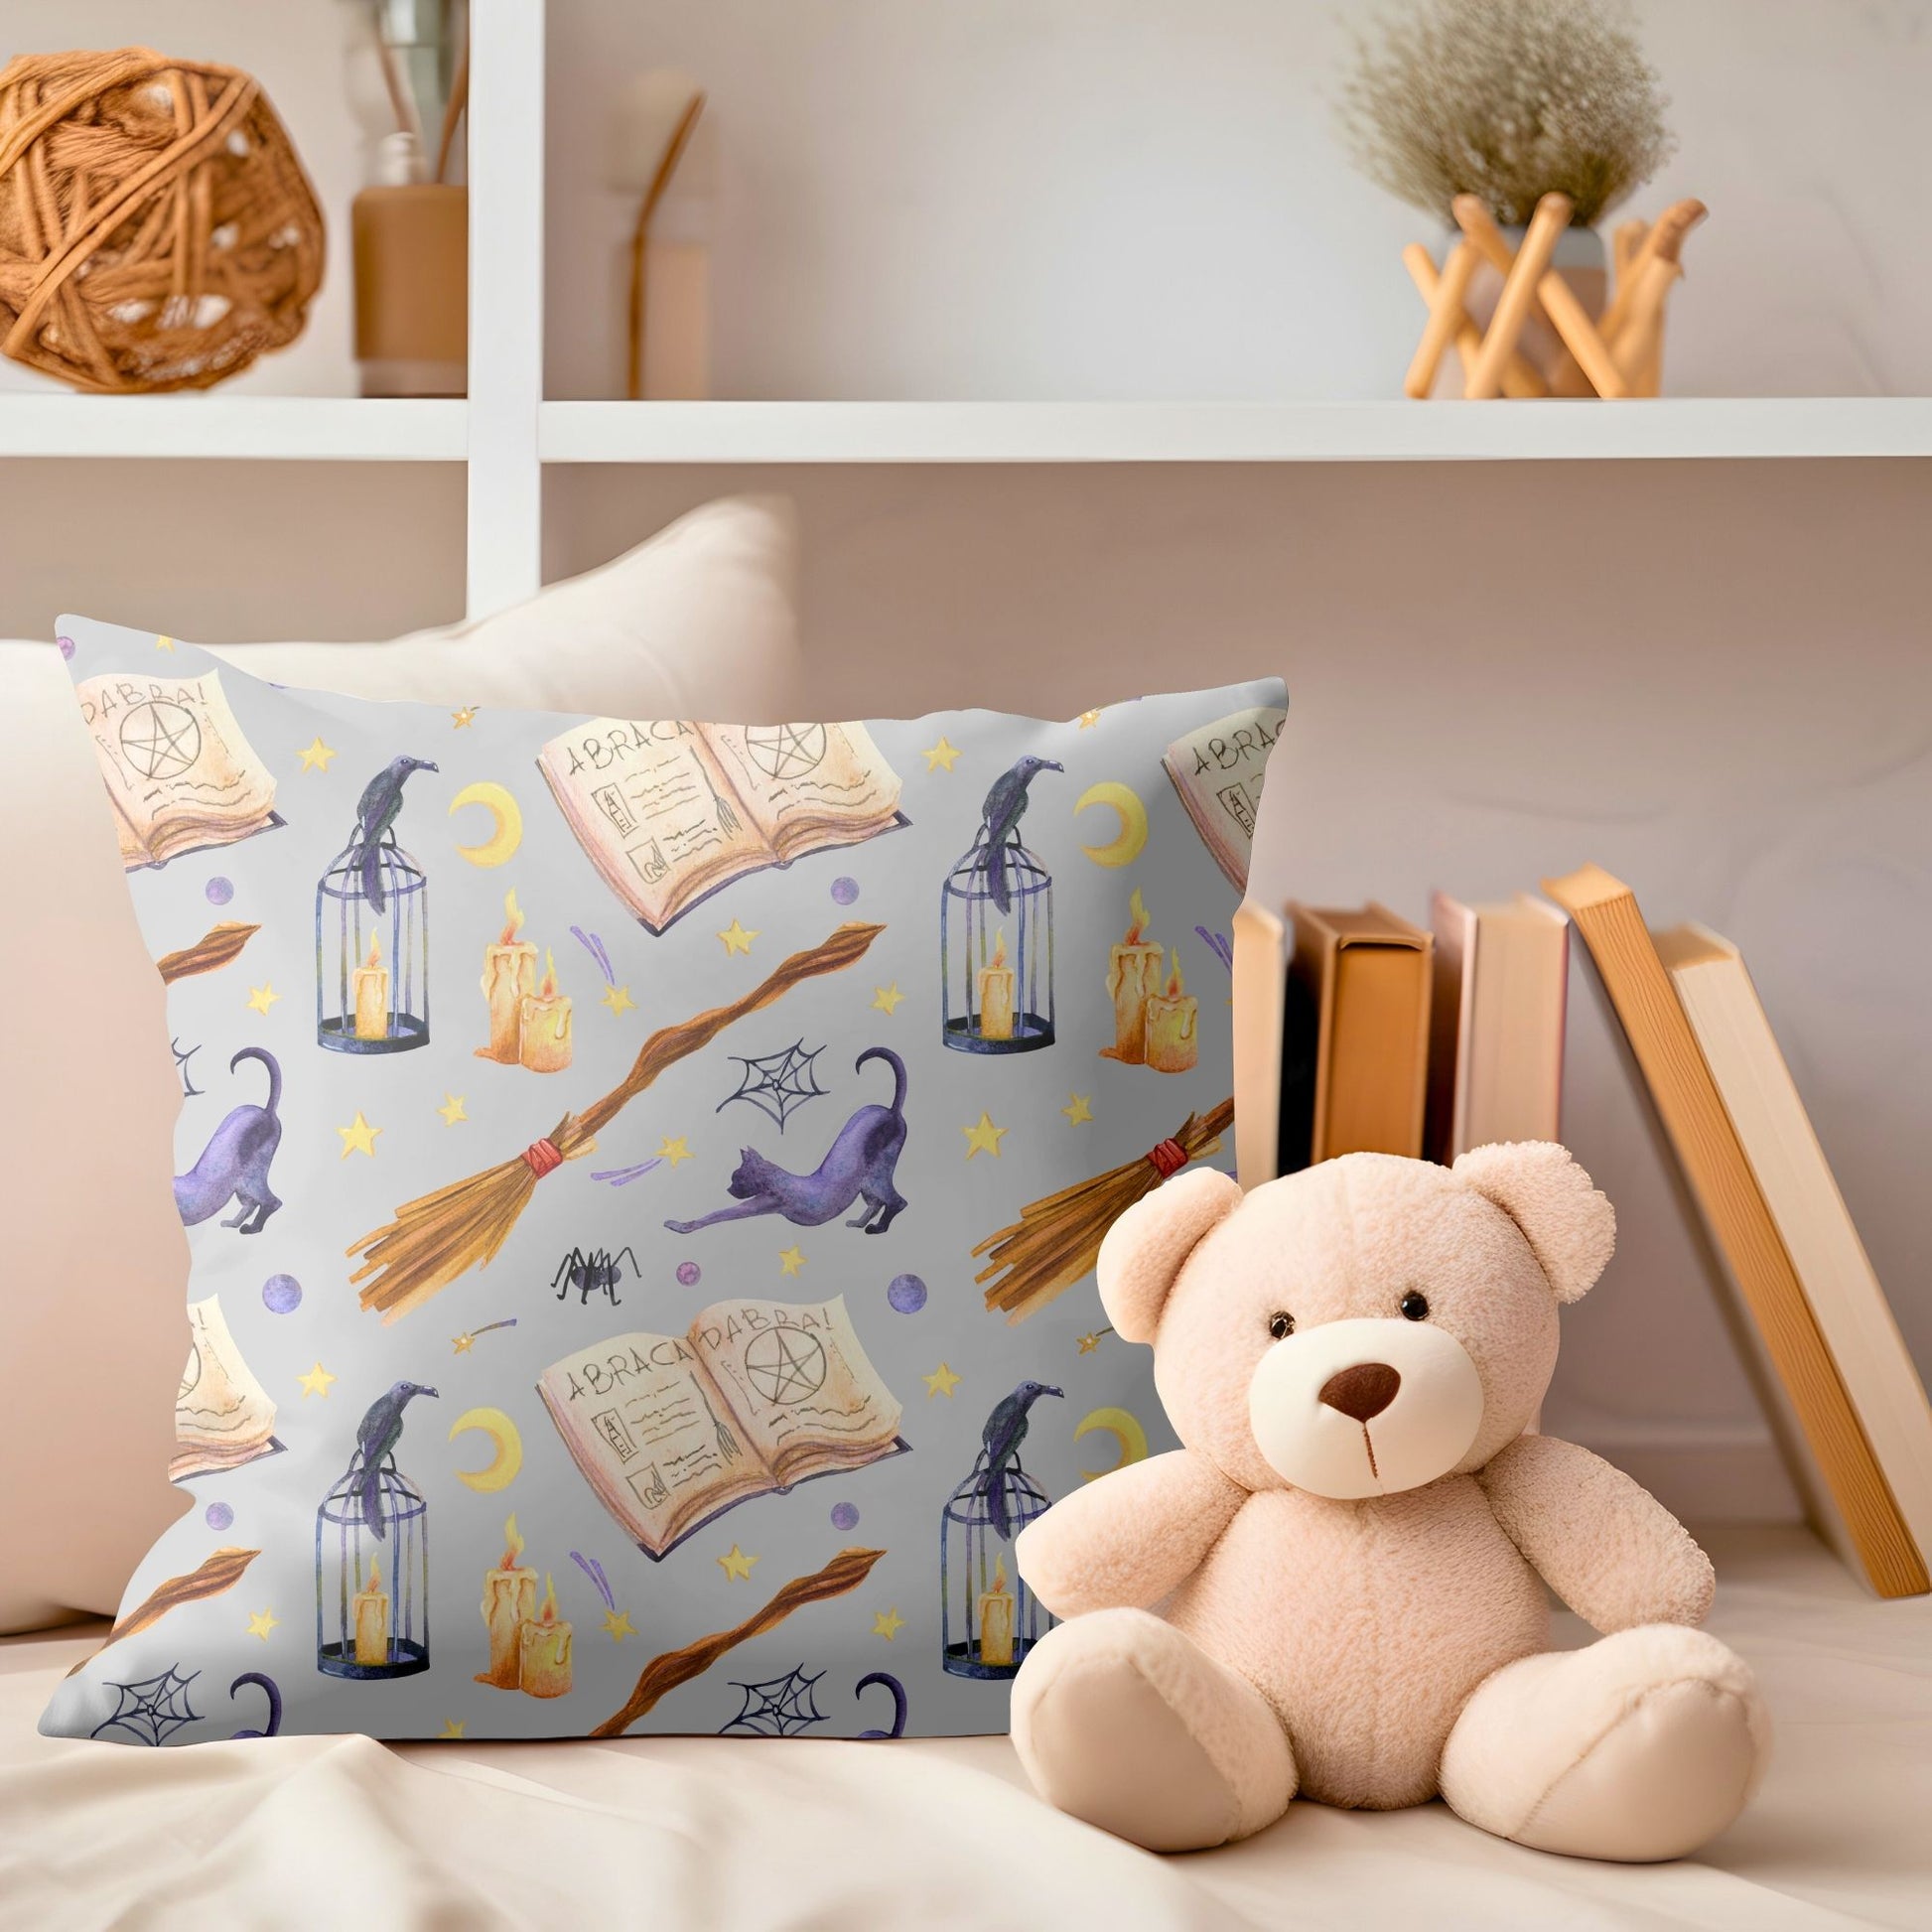 Whimsical kids pillow showcasing a variety of wizarding elements for imaginative play.